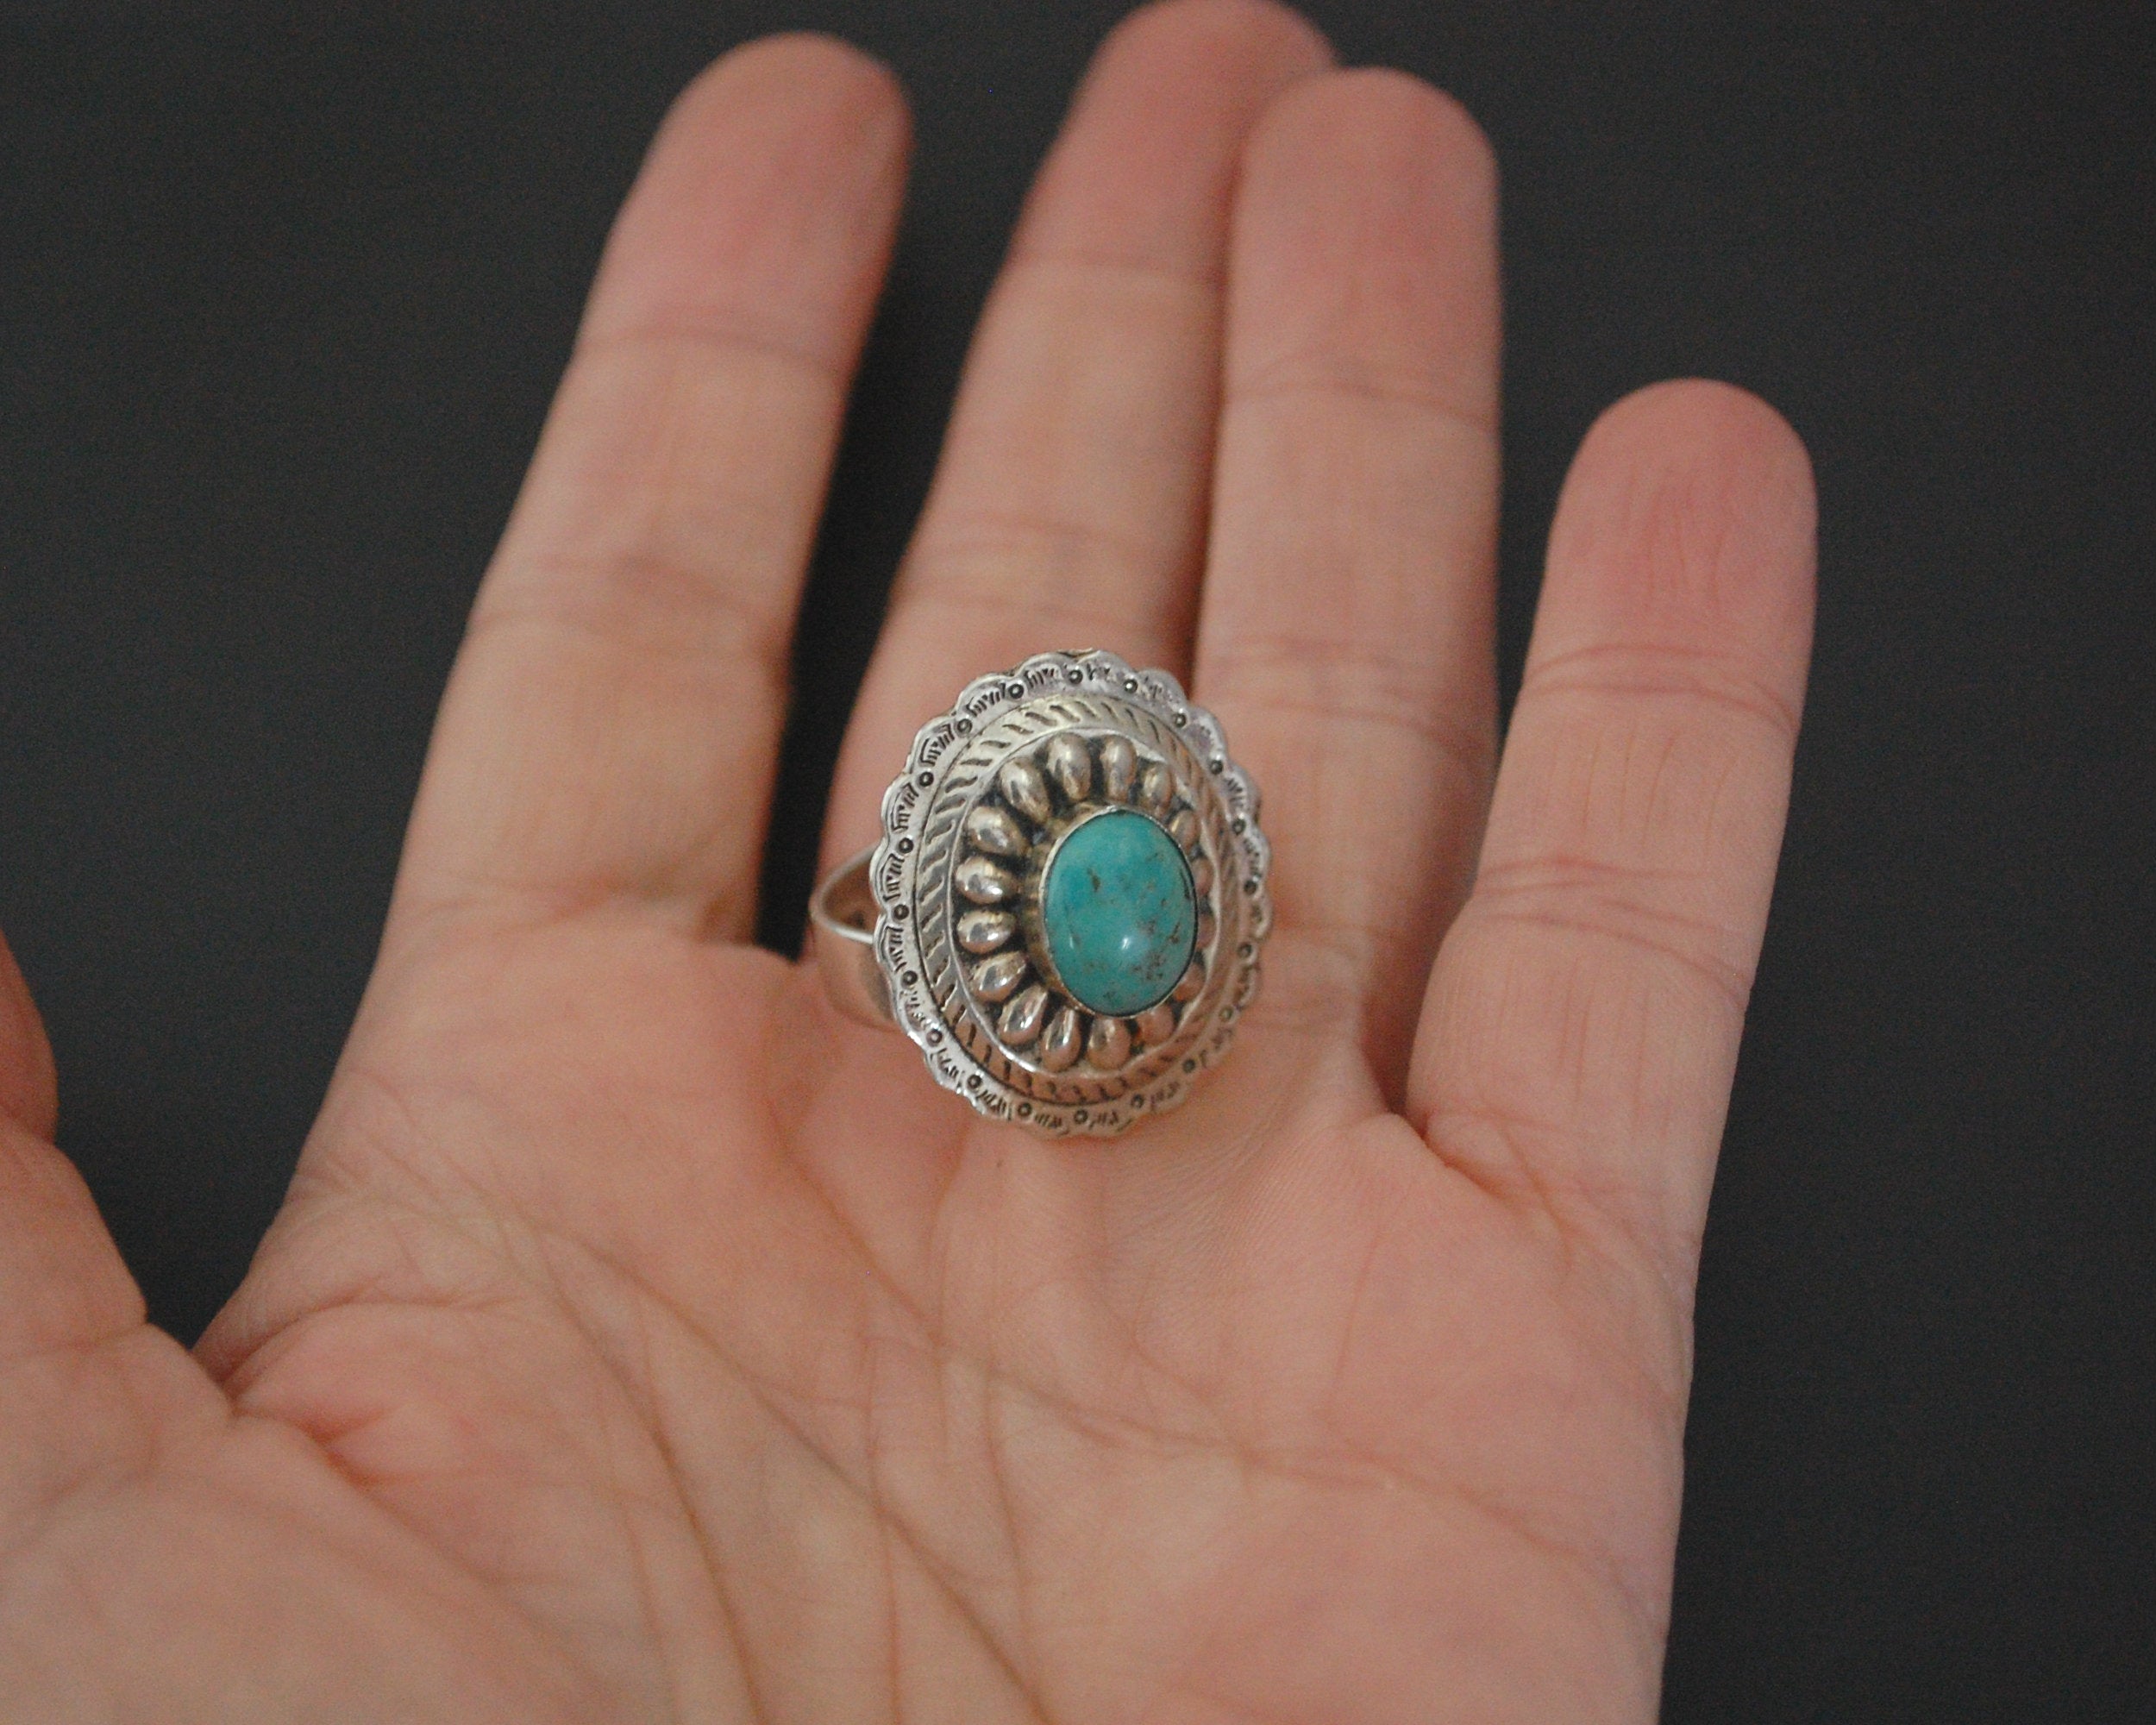 Native American Concho Turquoise Ring - Size 7 / Adjustable